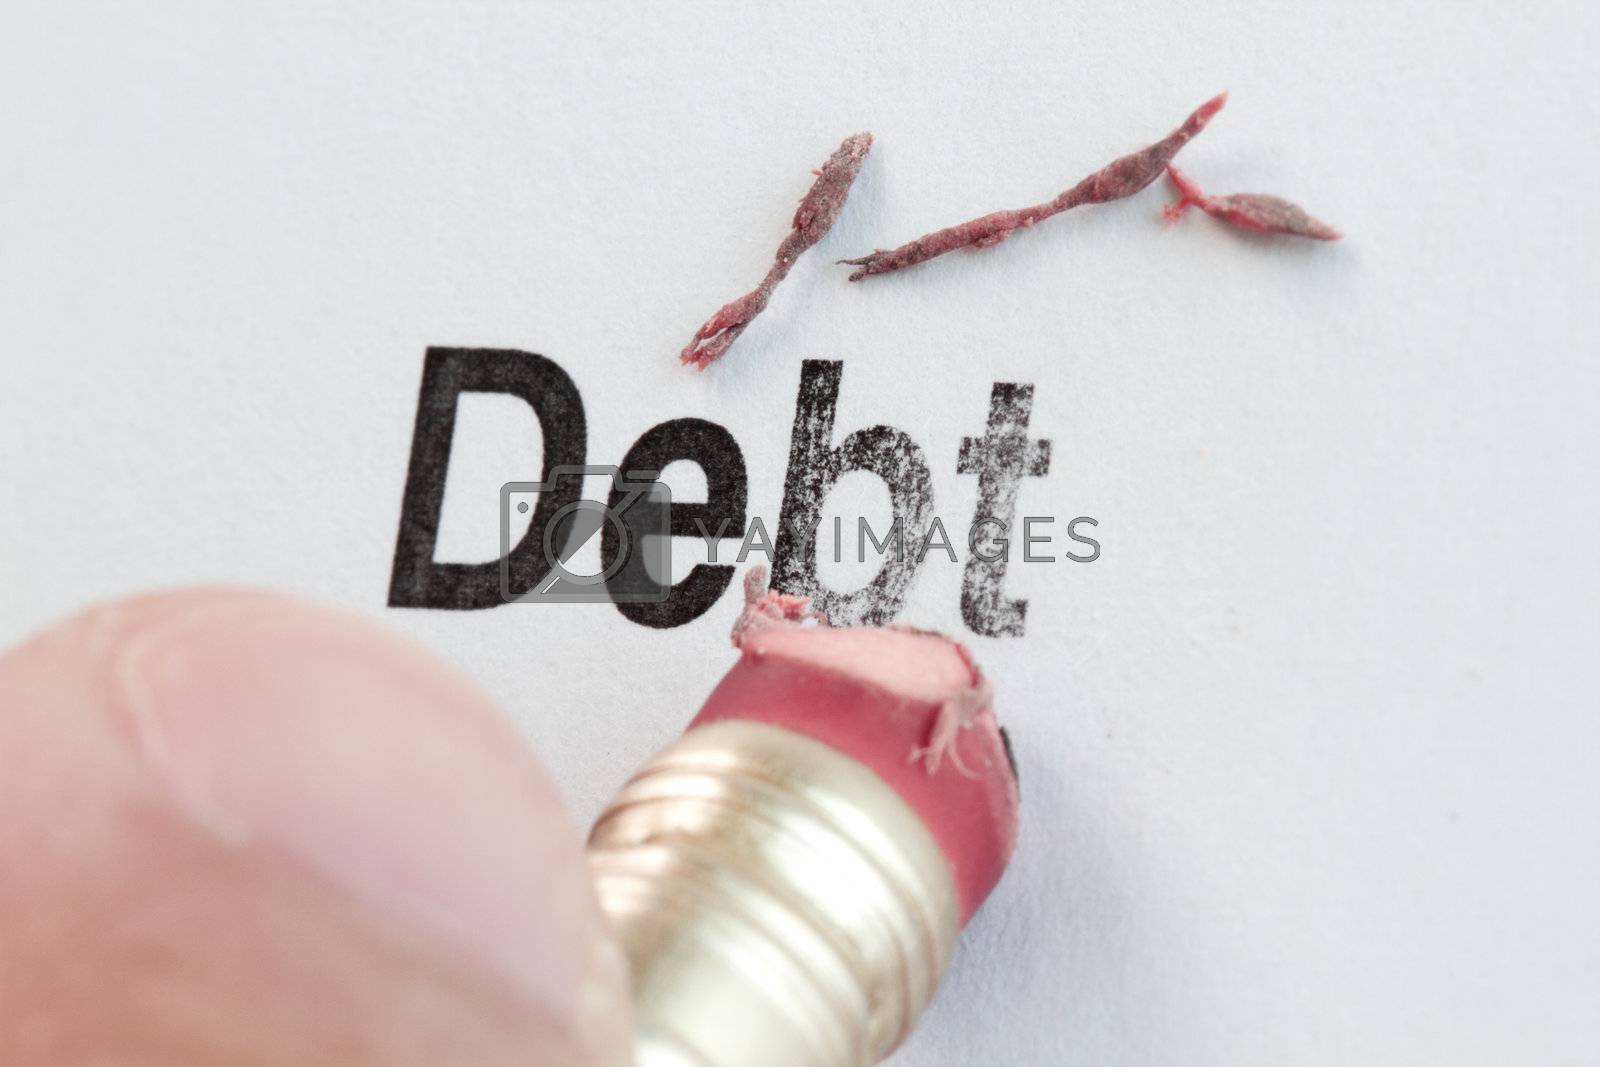 Royalty free image of eraser and word debt by sacatani